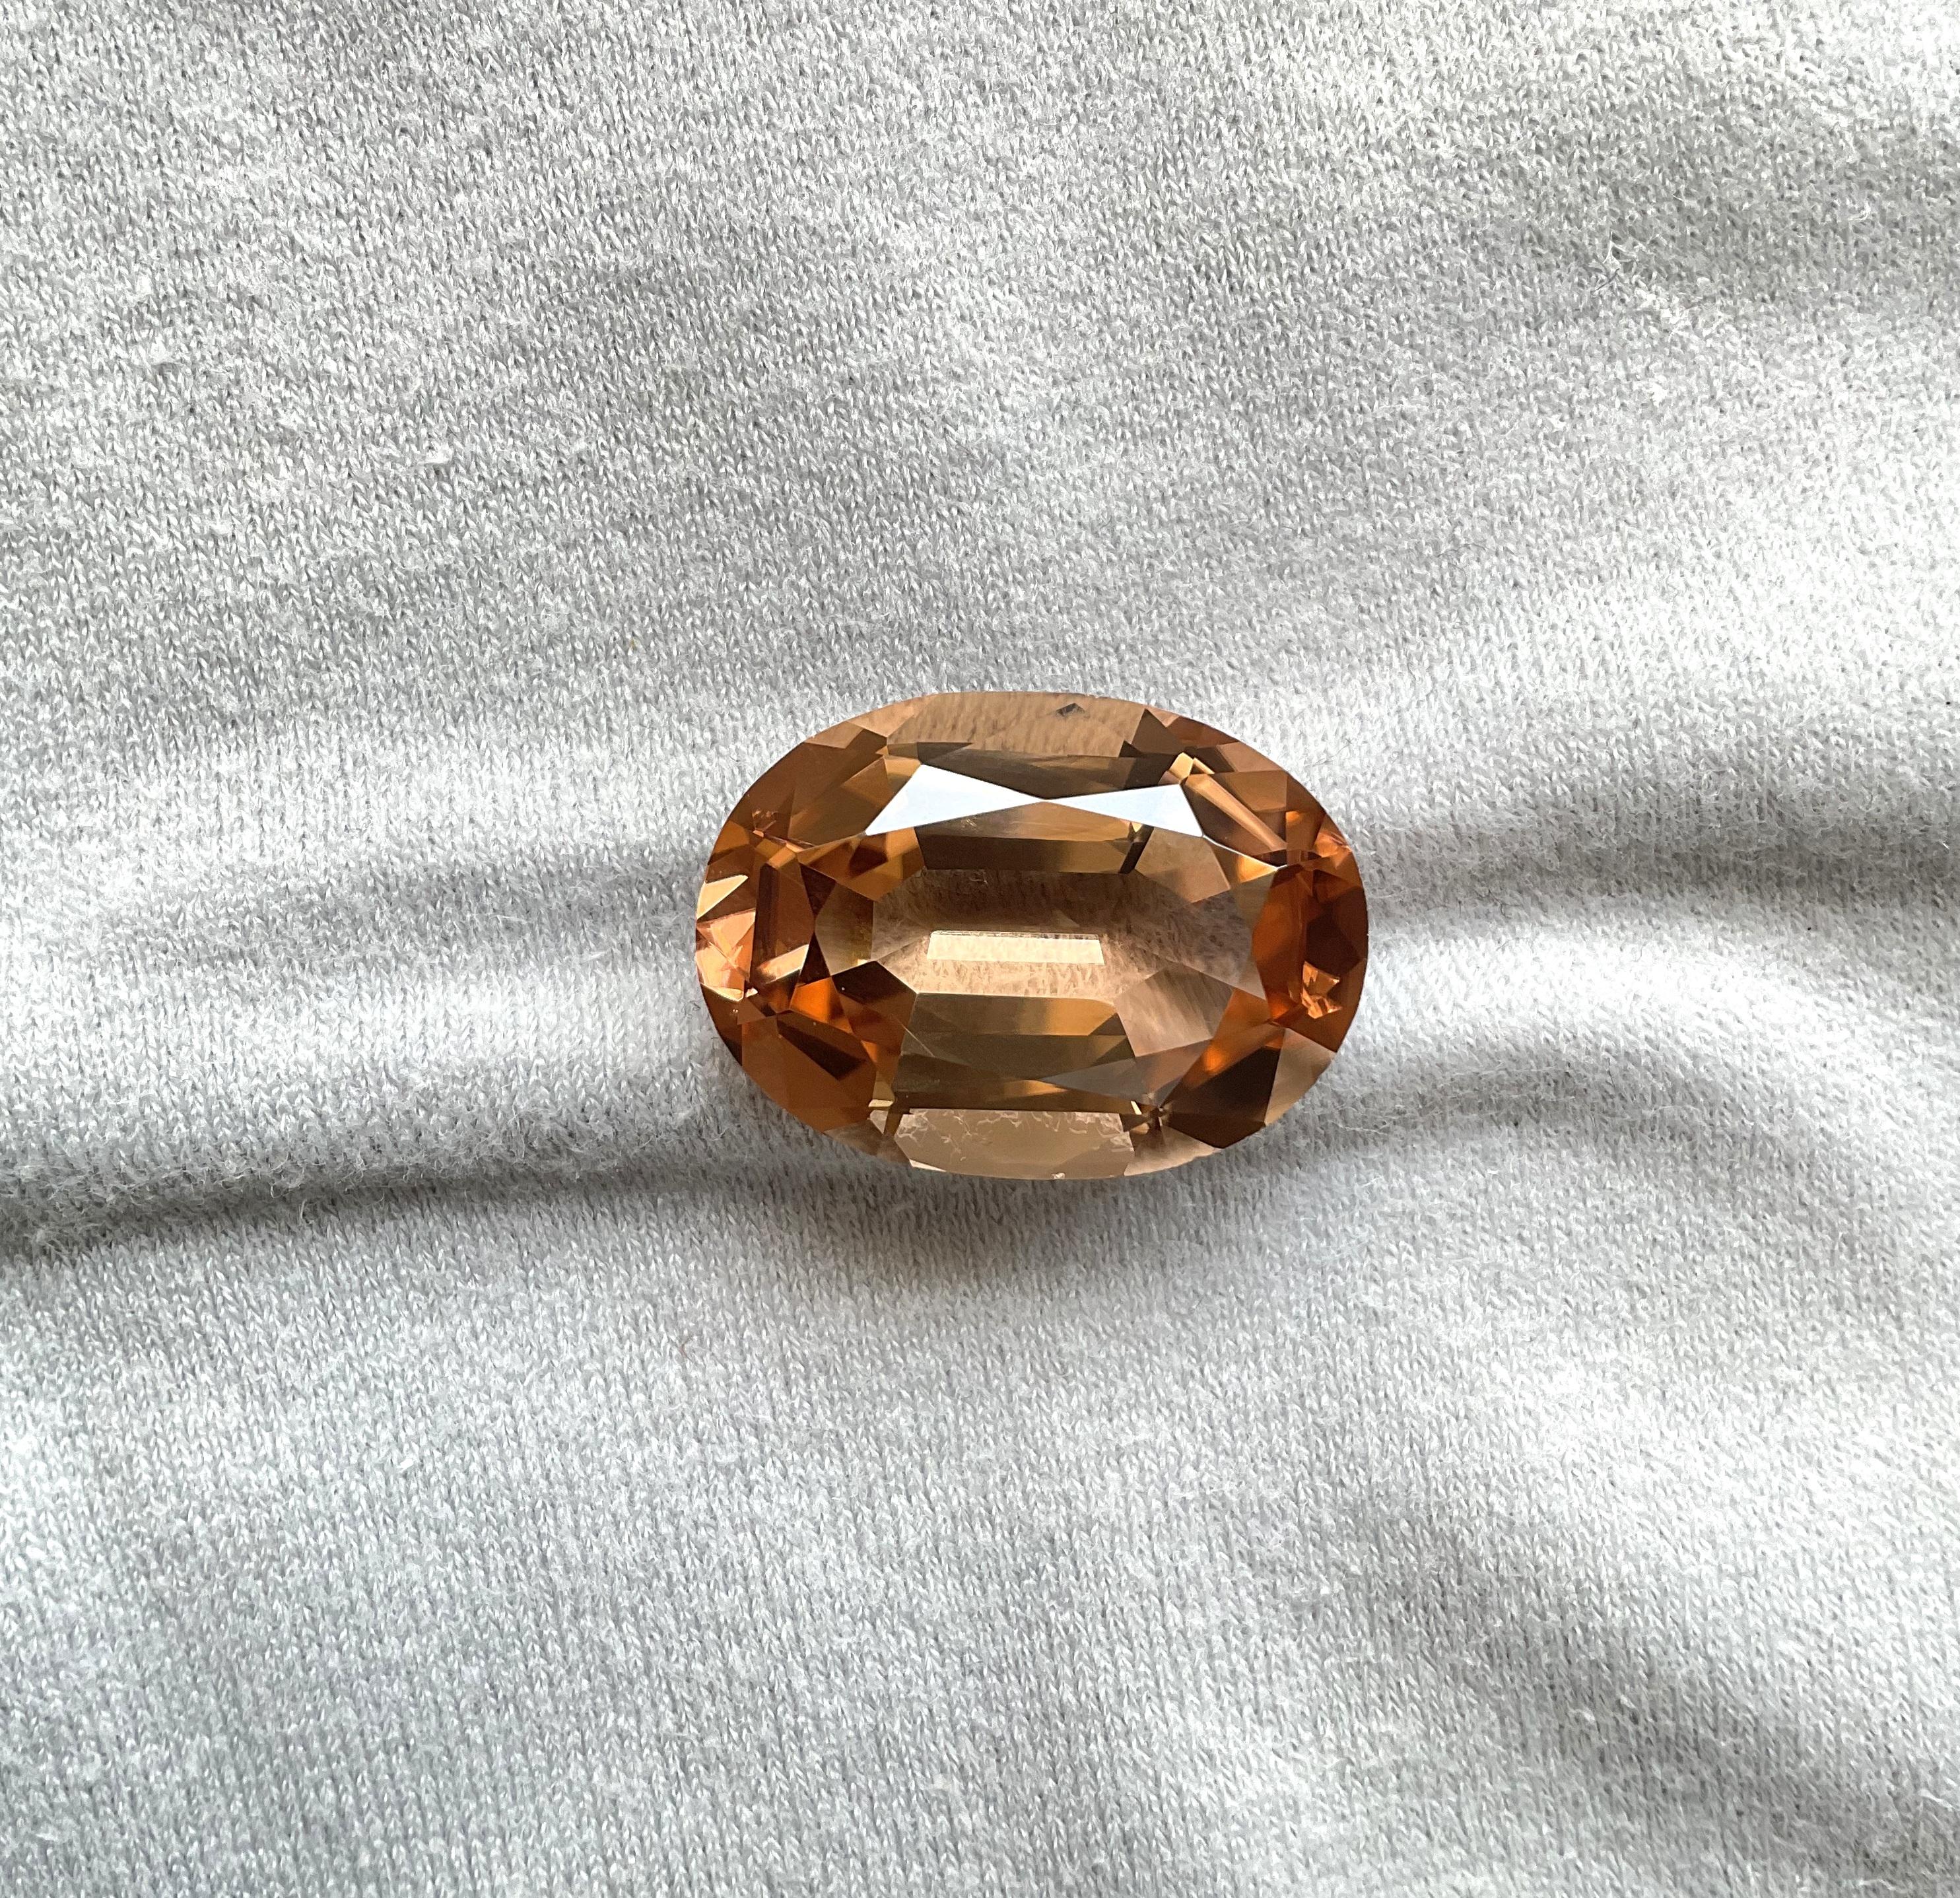 33.37 Carats Top Quality Tourmaline Oval Cut Stone Fine Jewelry Natural Gemstone In New Condition For Sale In Jaipur, RJ